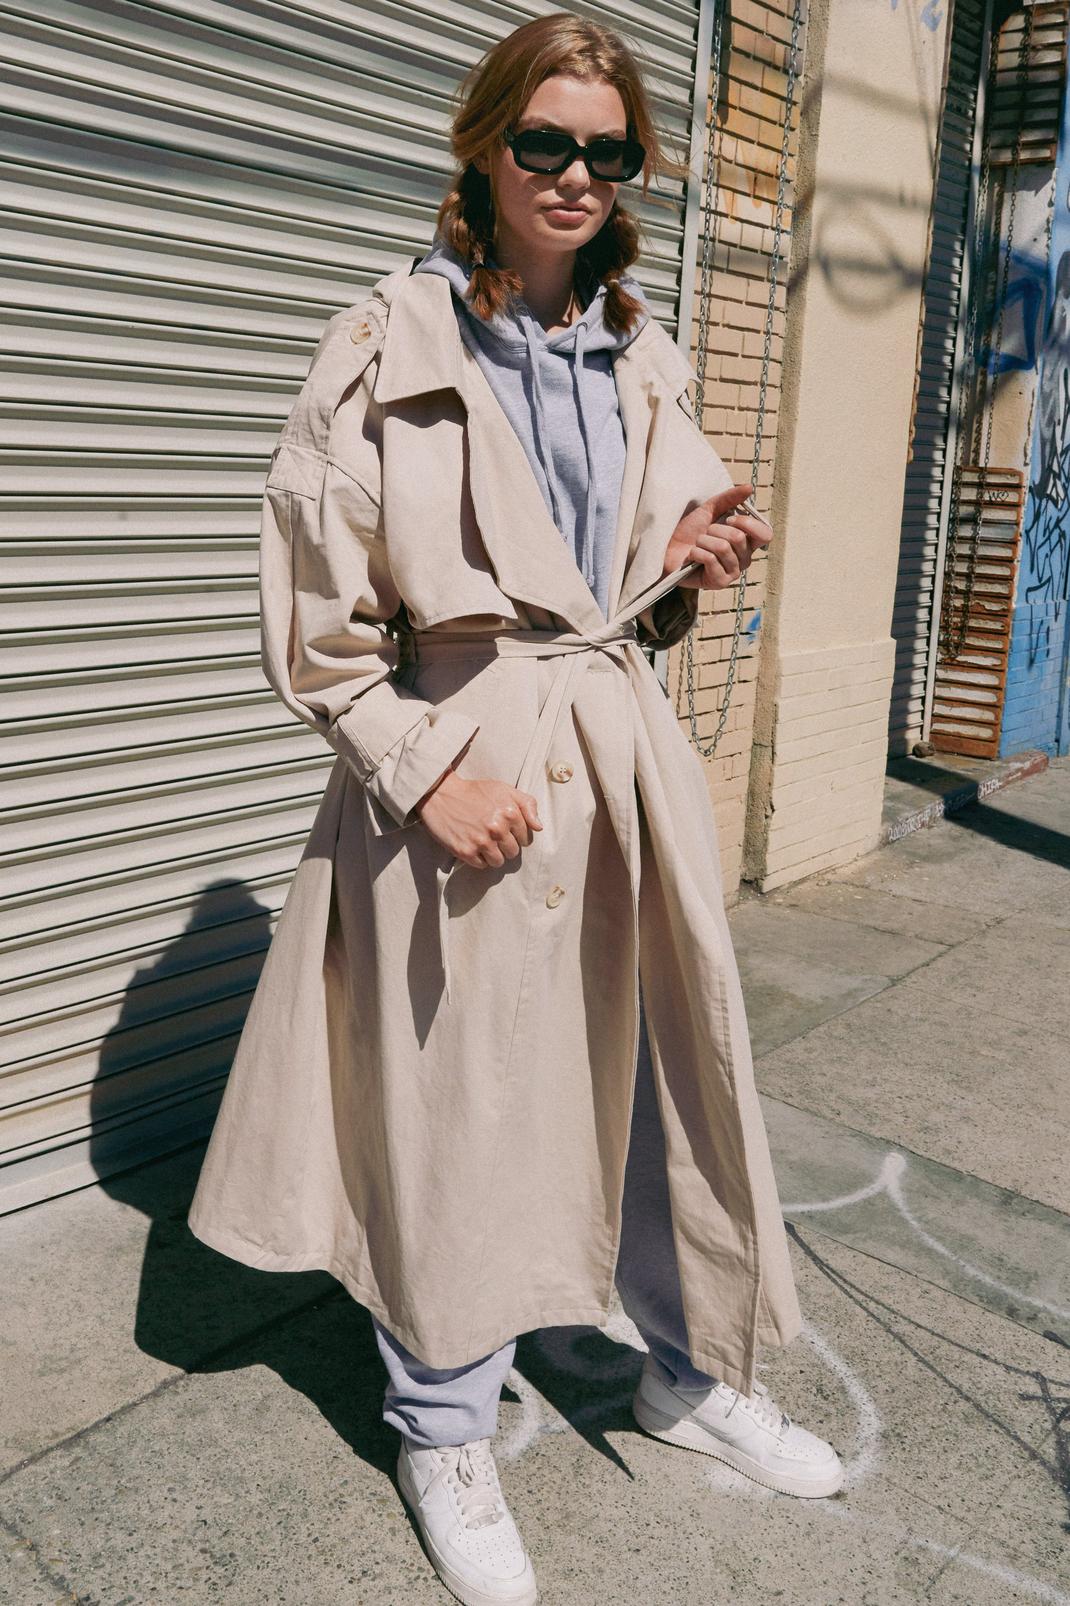 https://media.nastygal.com/i/nastygal/agg02521_light%20stone_xl/female-light%20stone-hooded-oversized-belted-trench-coat/?w=1070&qlt=default&fmt.jp2.qlt=70&fmt=auto&sm=fit